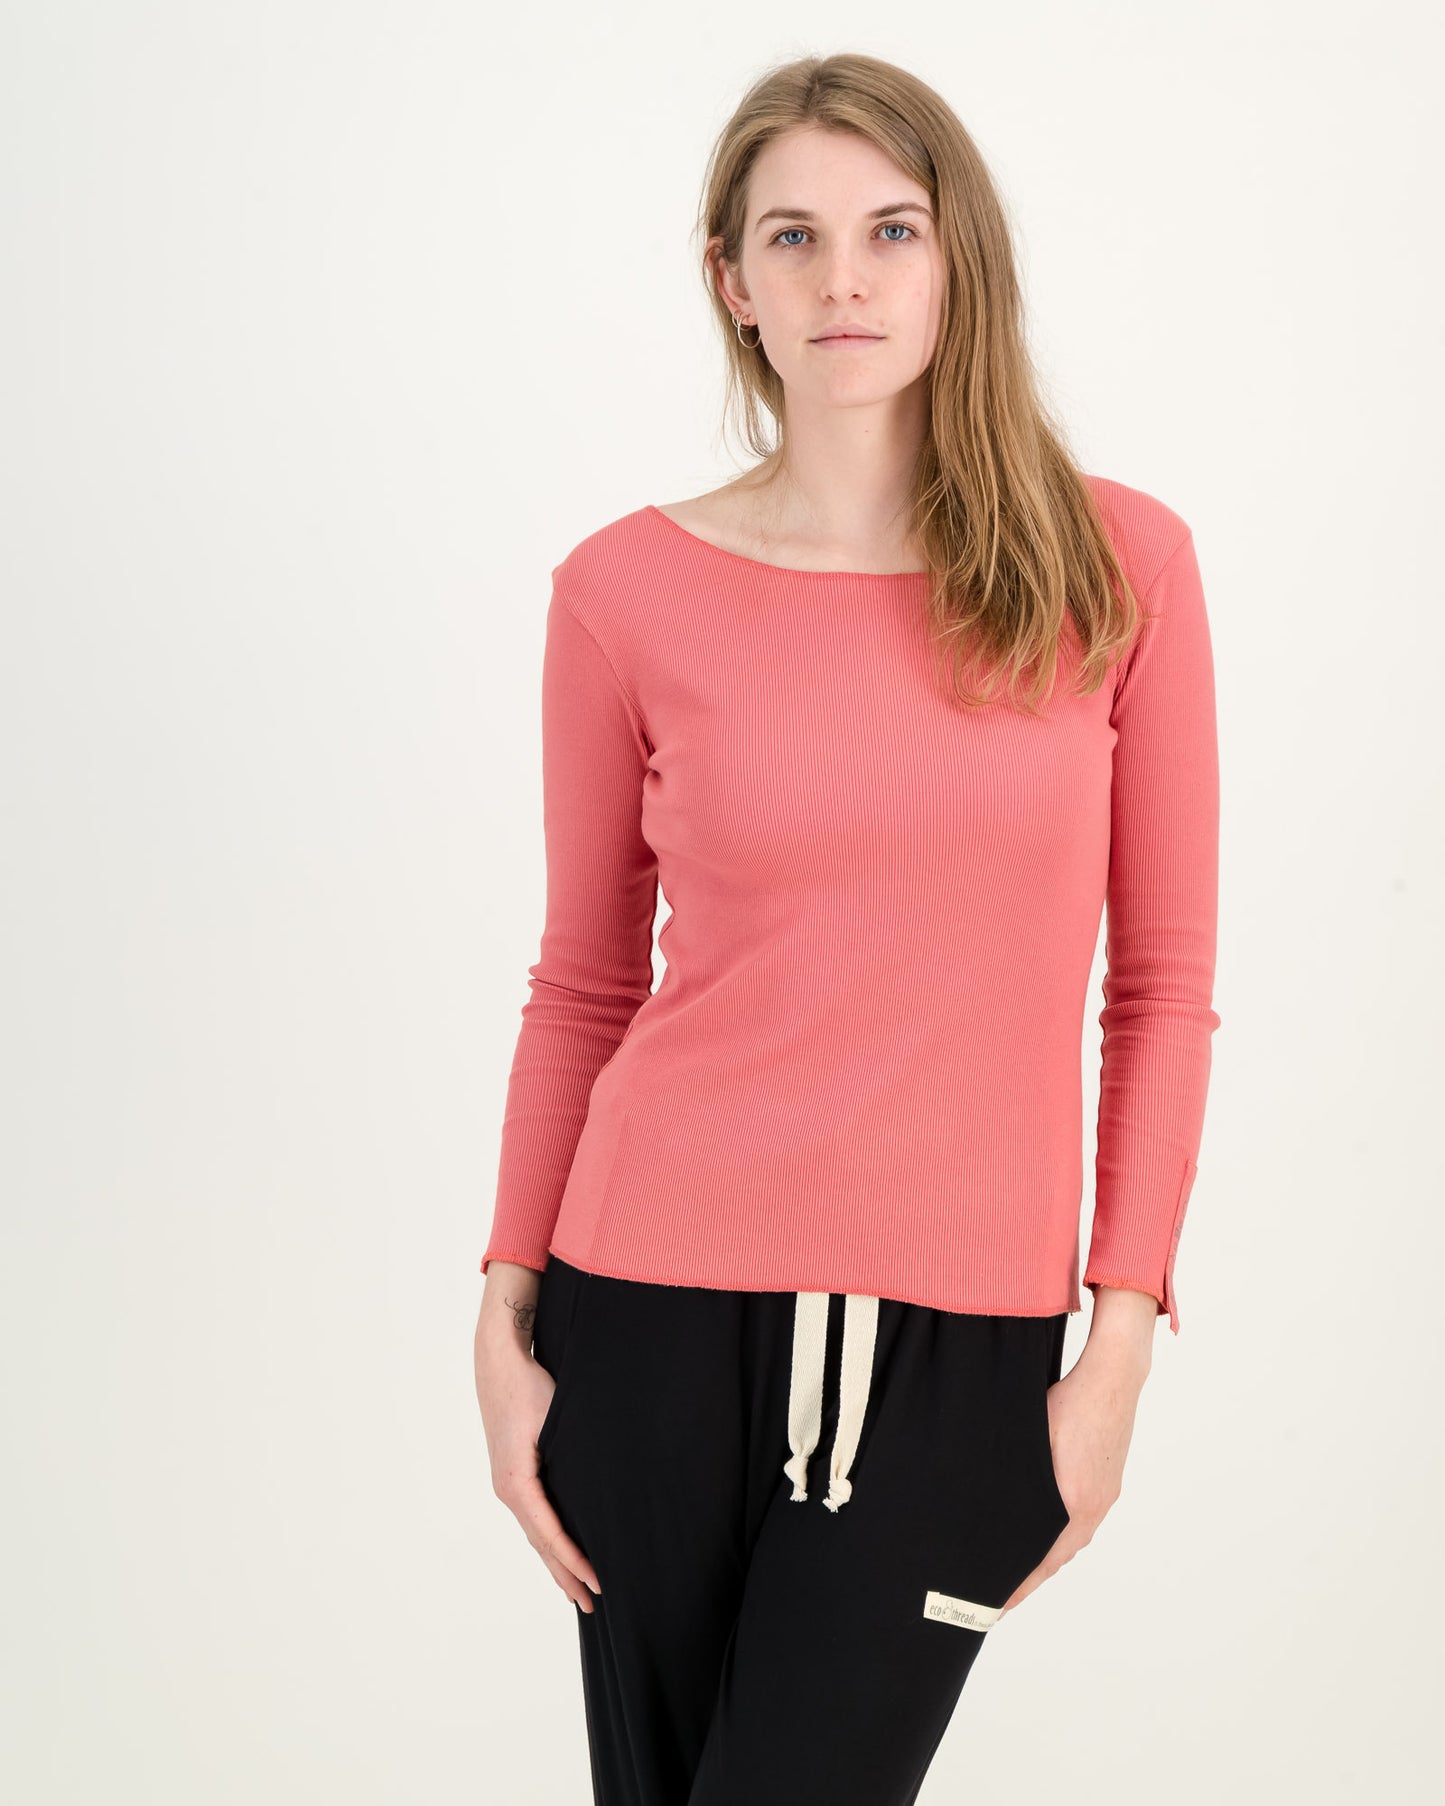 Overdyed Cotton Rib Top - Charcoal